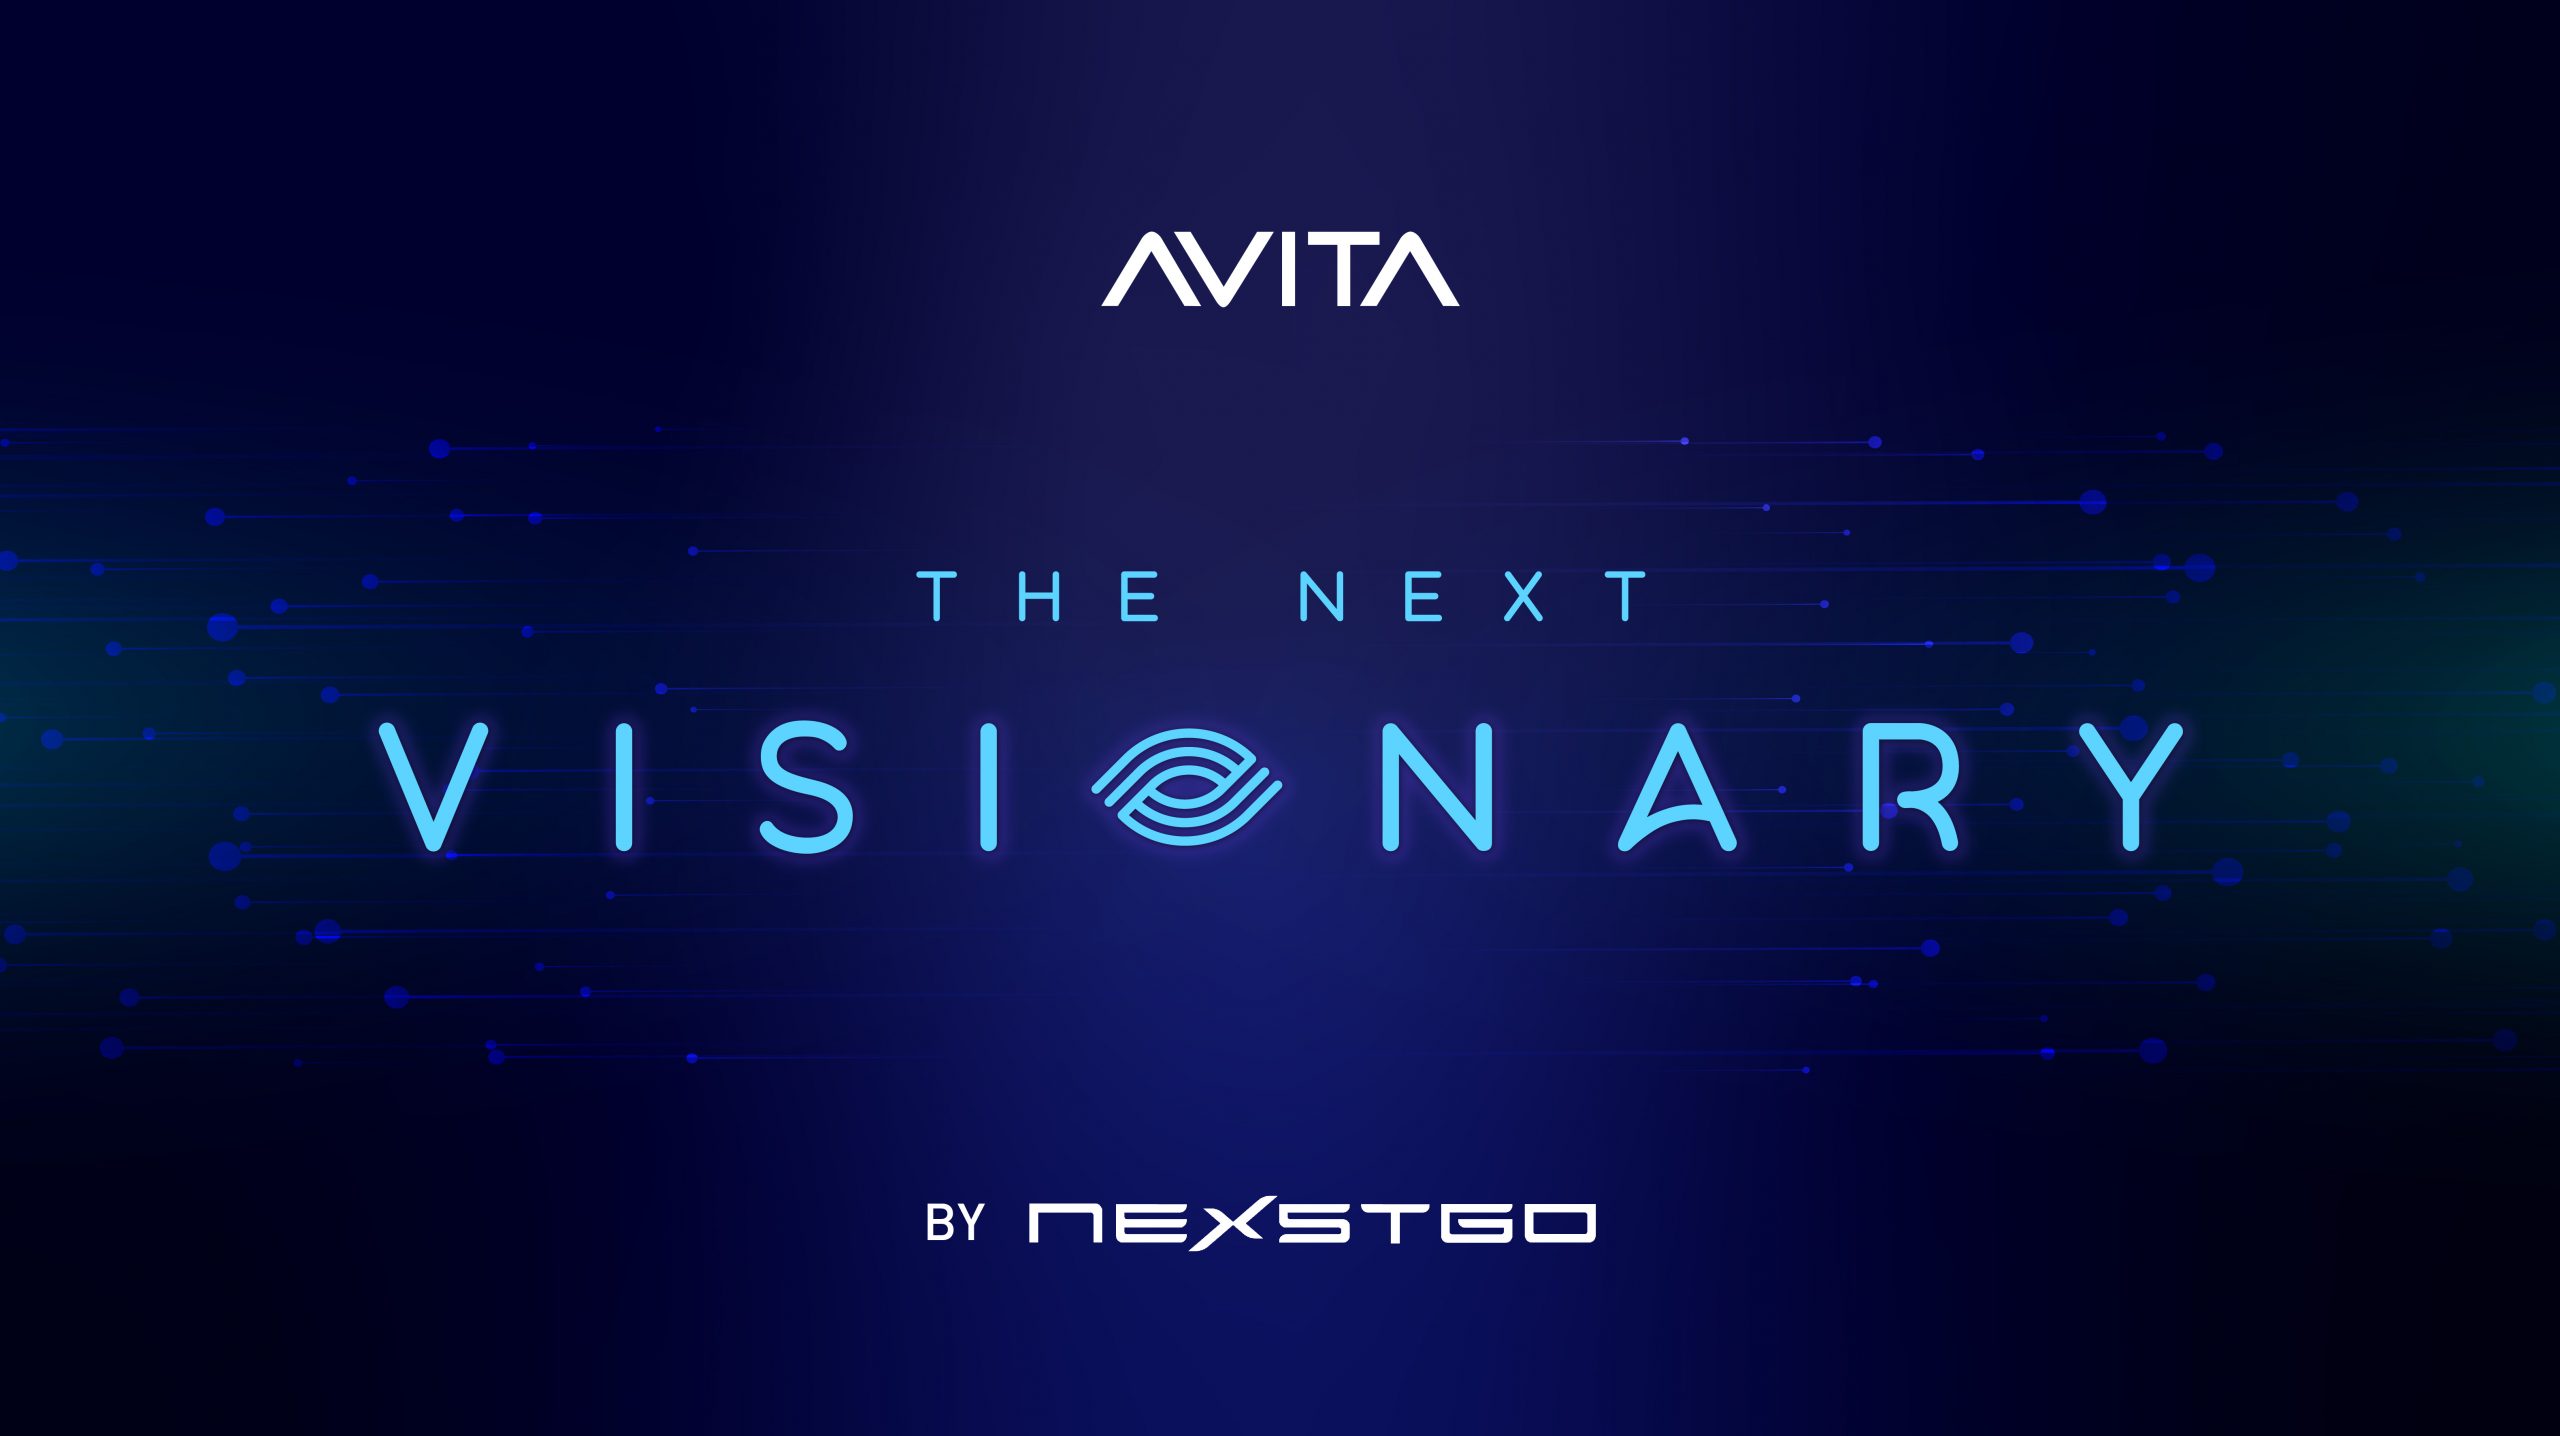 The Next Visionary: Nexstgo joins CES 2021 to debut new architecture built around the needs of the world's top content creators with new AVITA fashion tech